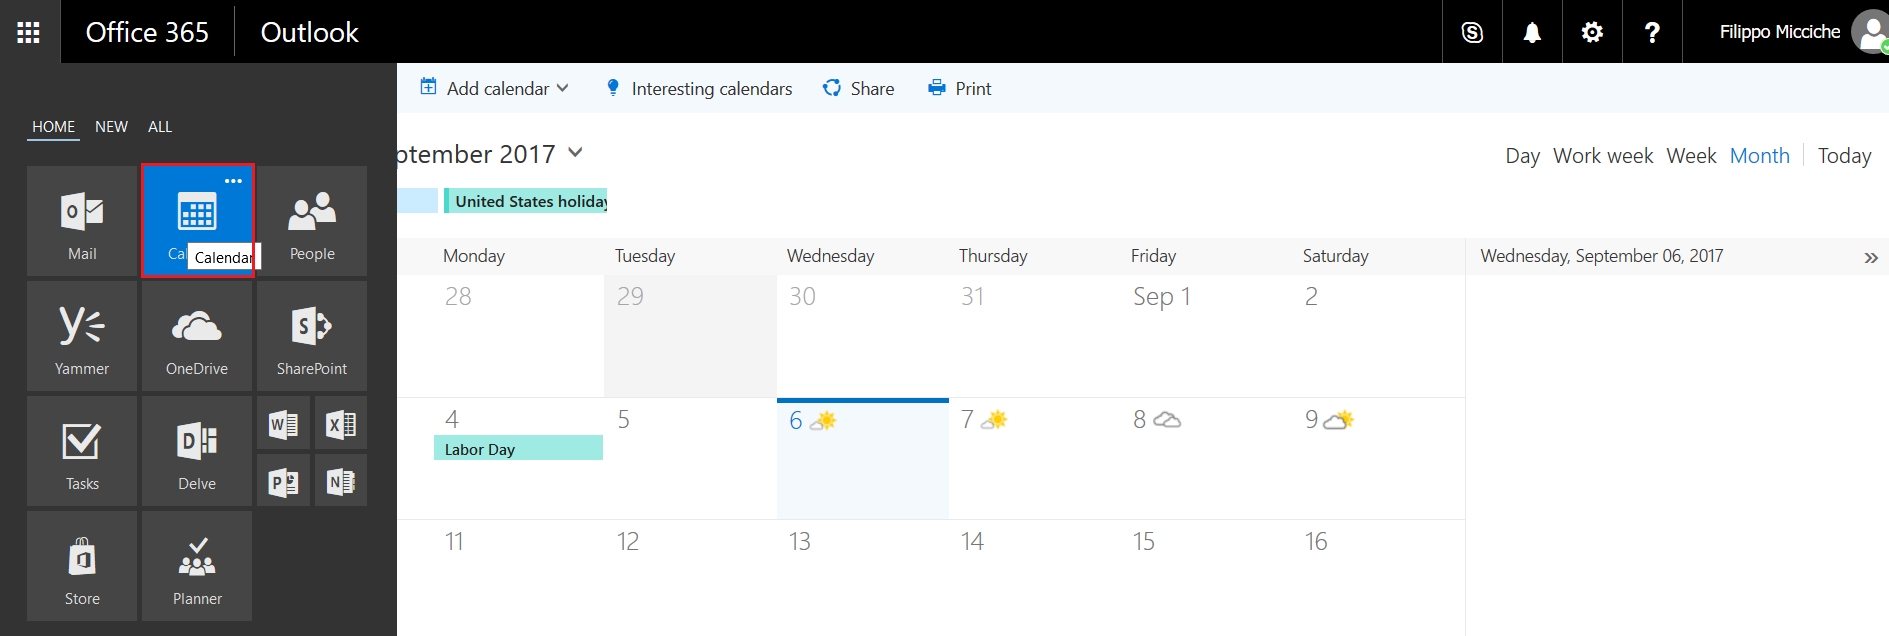 How To Troubleshoot Meeting Invitations In Outlook Calendar Icon Disappeared From Outlook